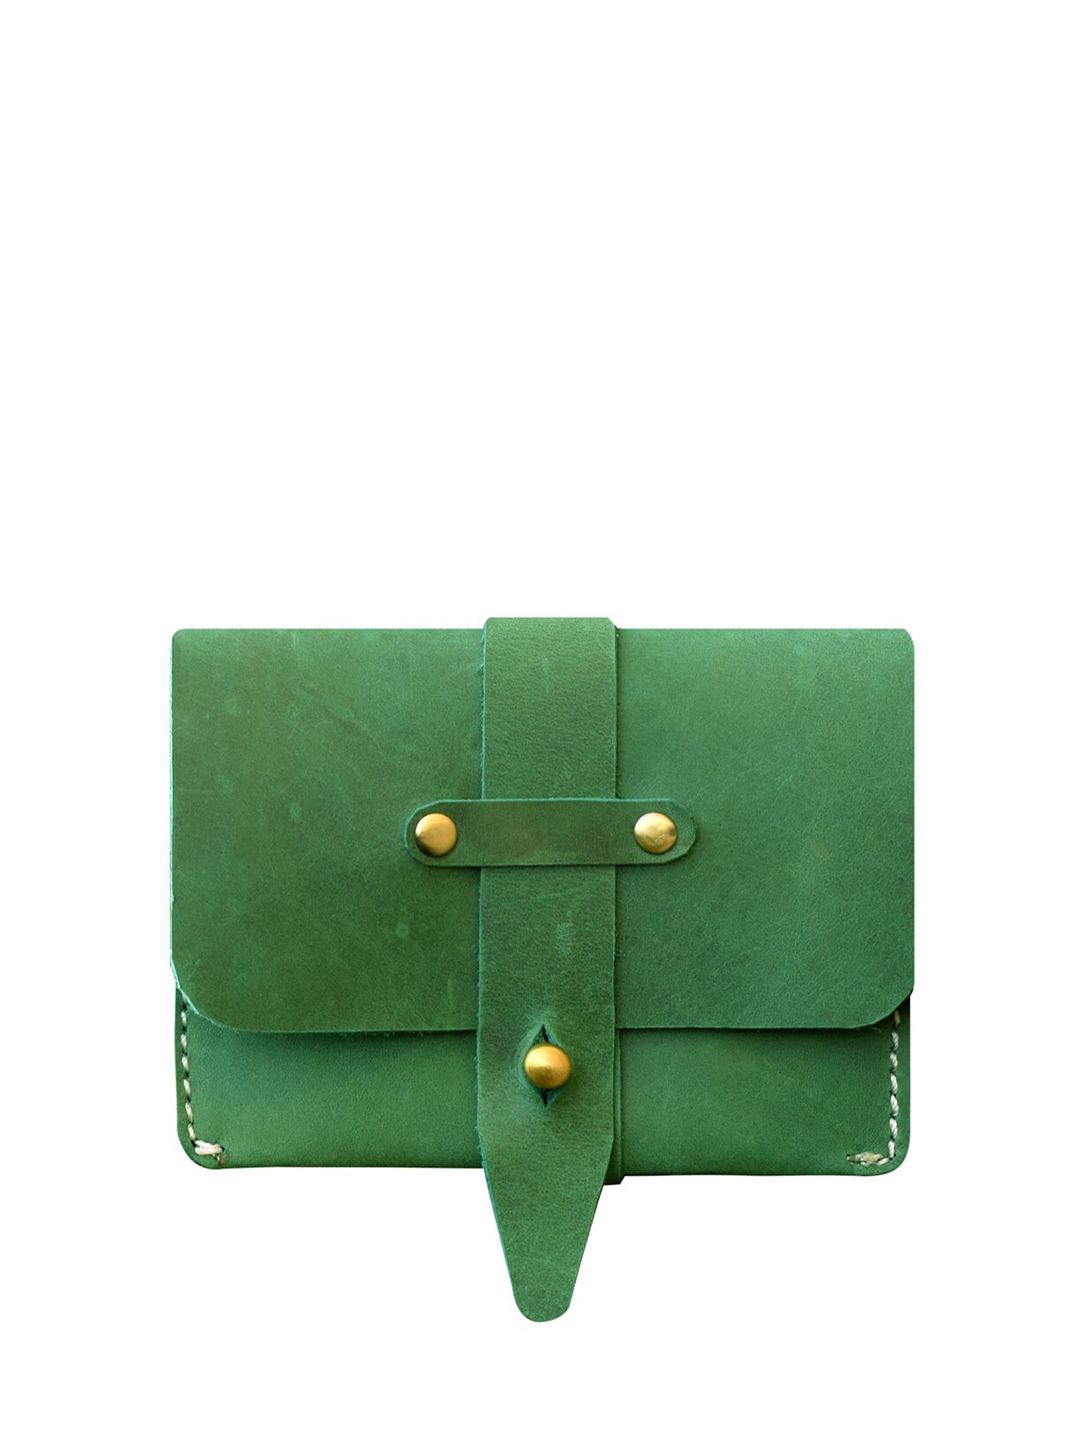 ABYS Unisex Green Textured Leather Card Holder Price in India